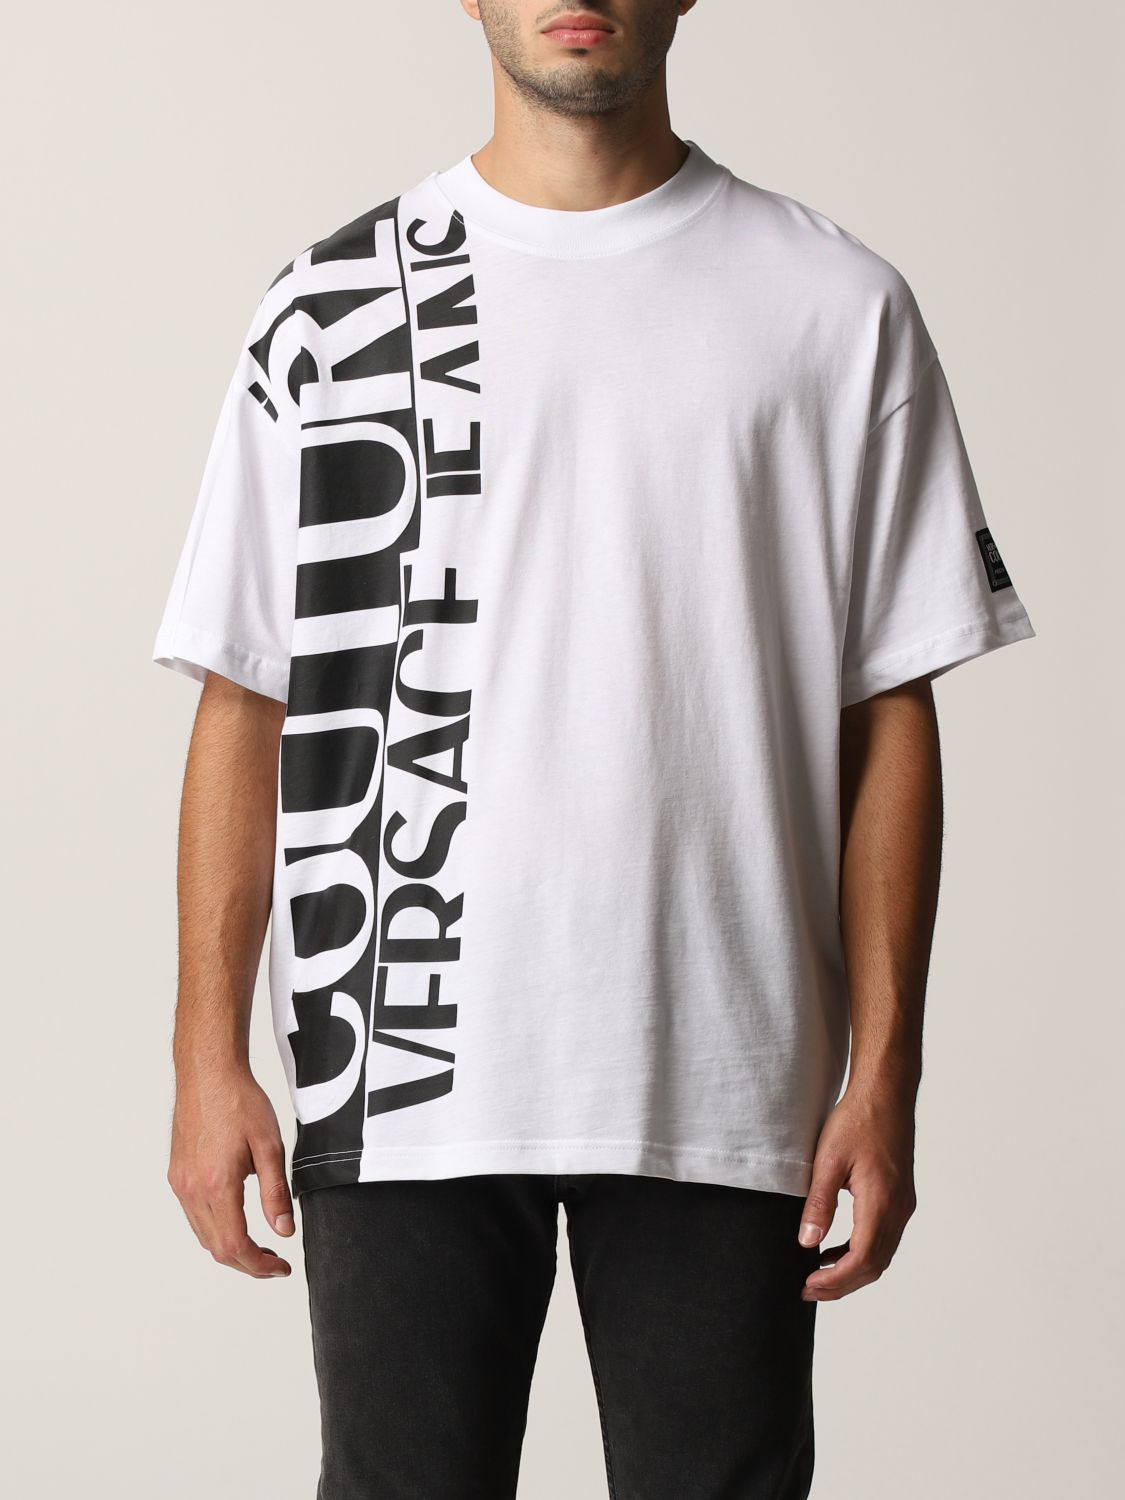 VERSACE JEANS COUTURE: t-shirt for man - White | Versace Jeans Couture shirt online on GIGLIO.COM